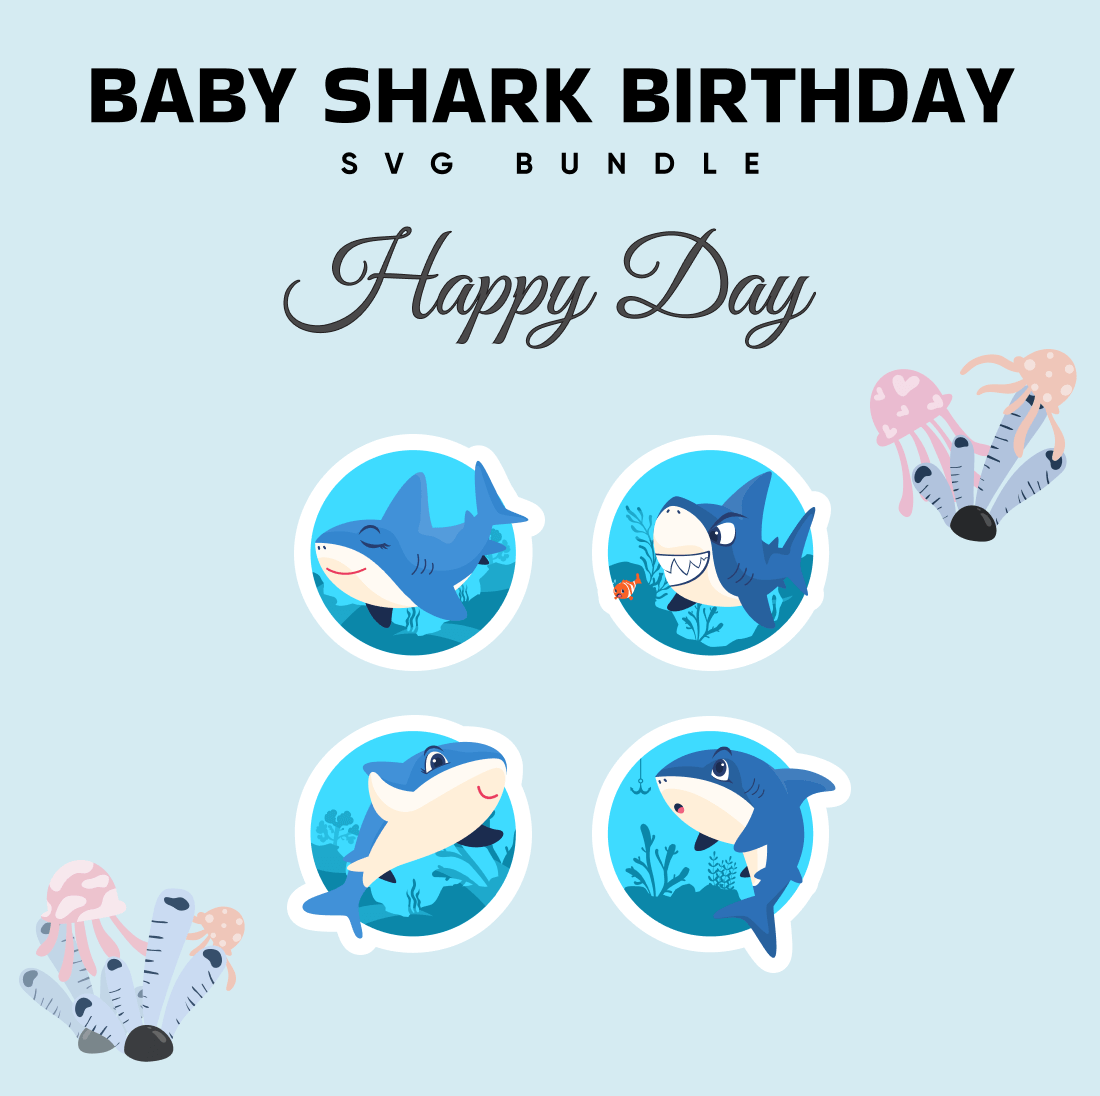 Baby shark birthday card with four stickers.